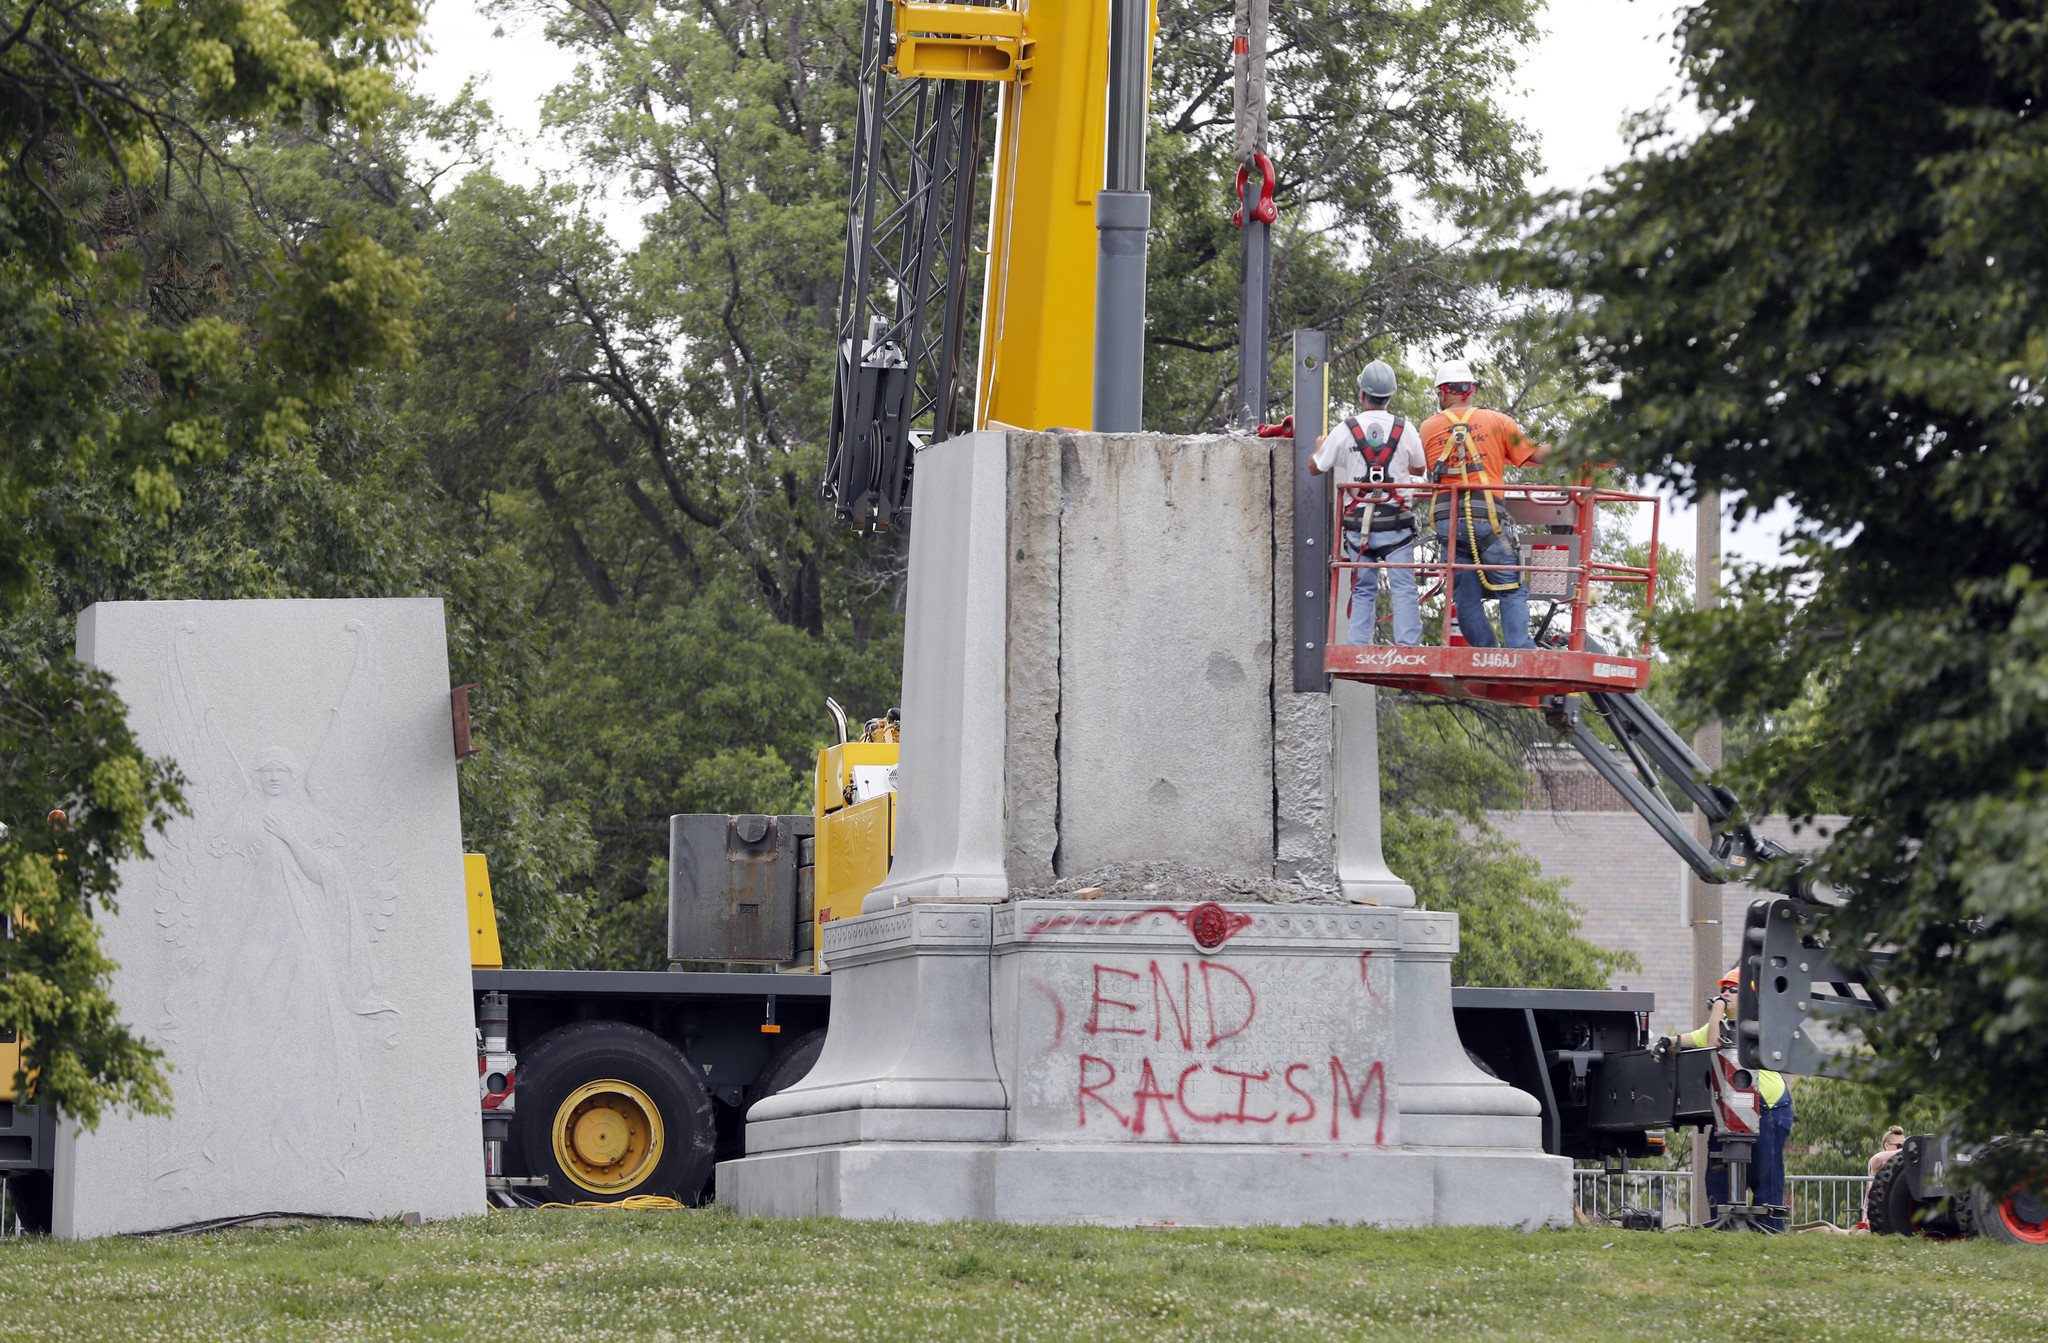 Confederate monument in St. Louis being dismantled - Chicago Tribune